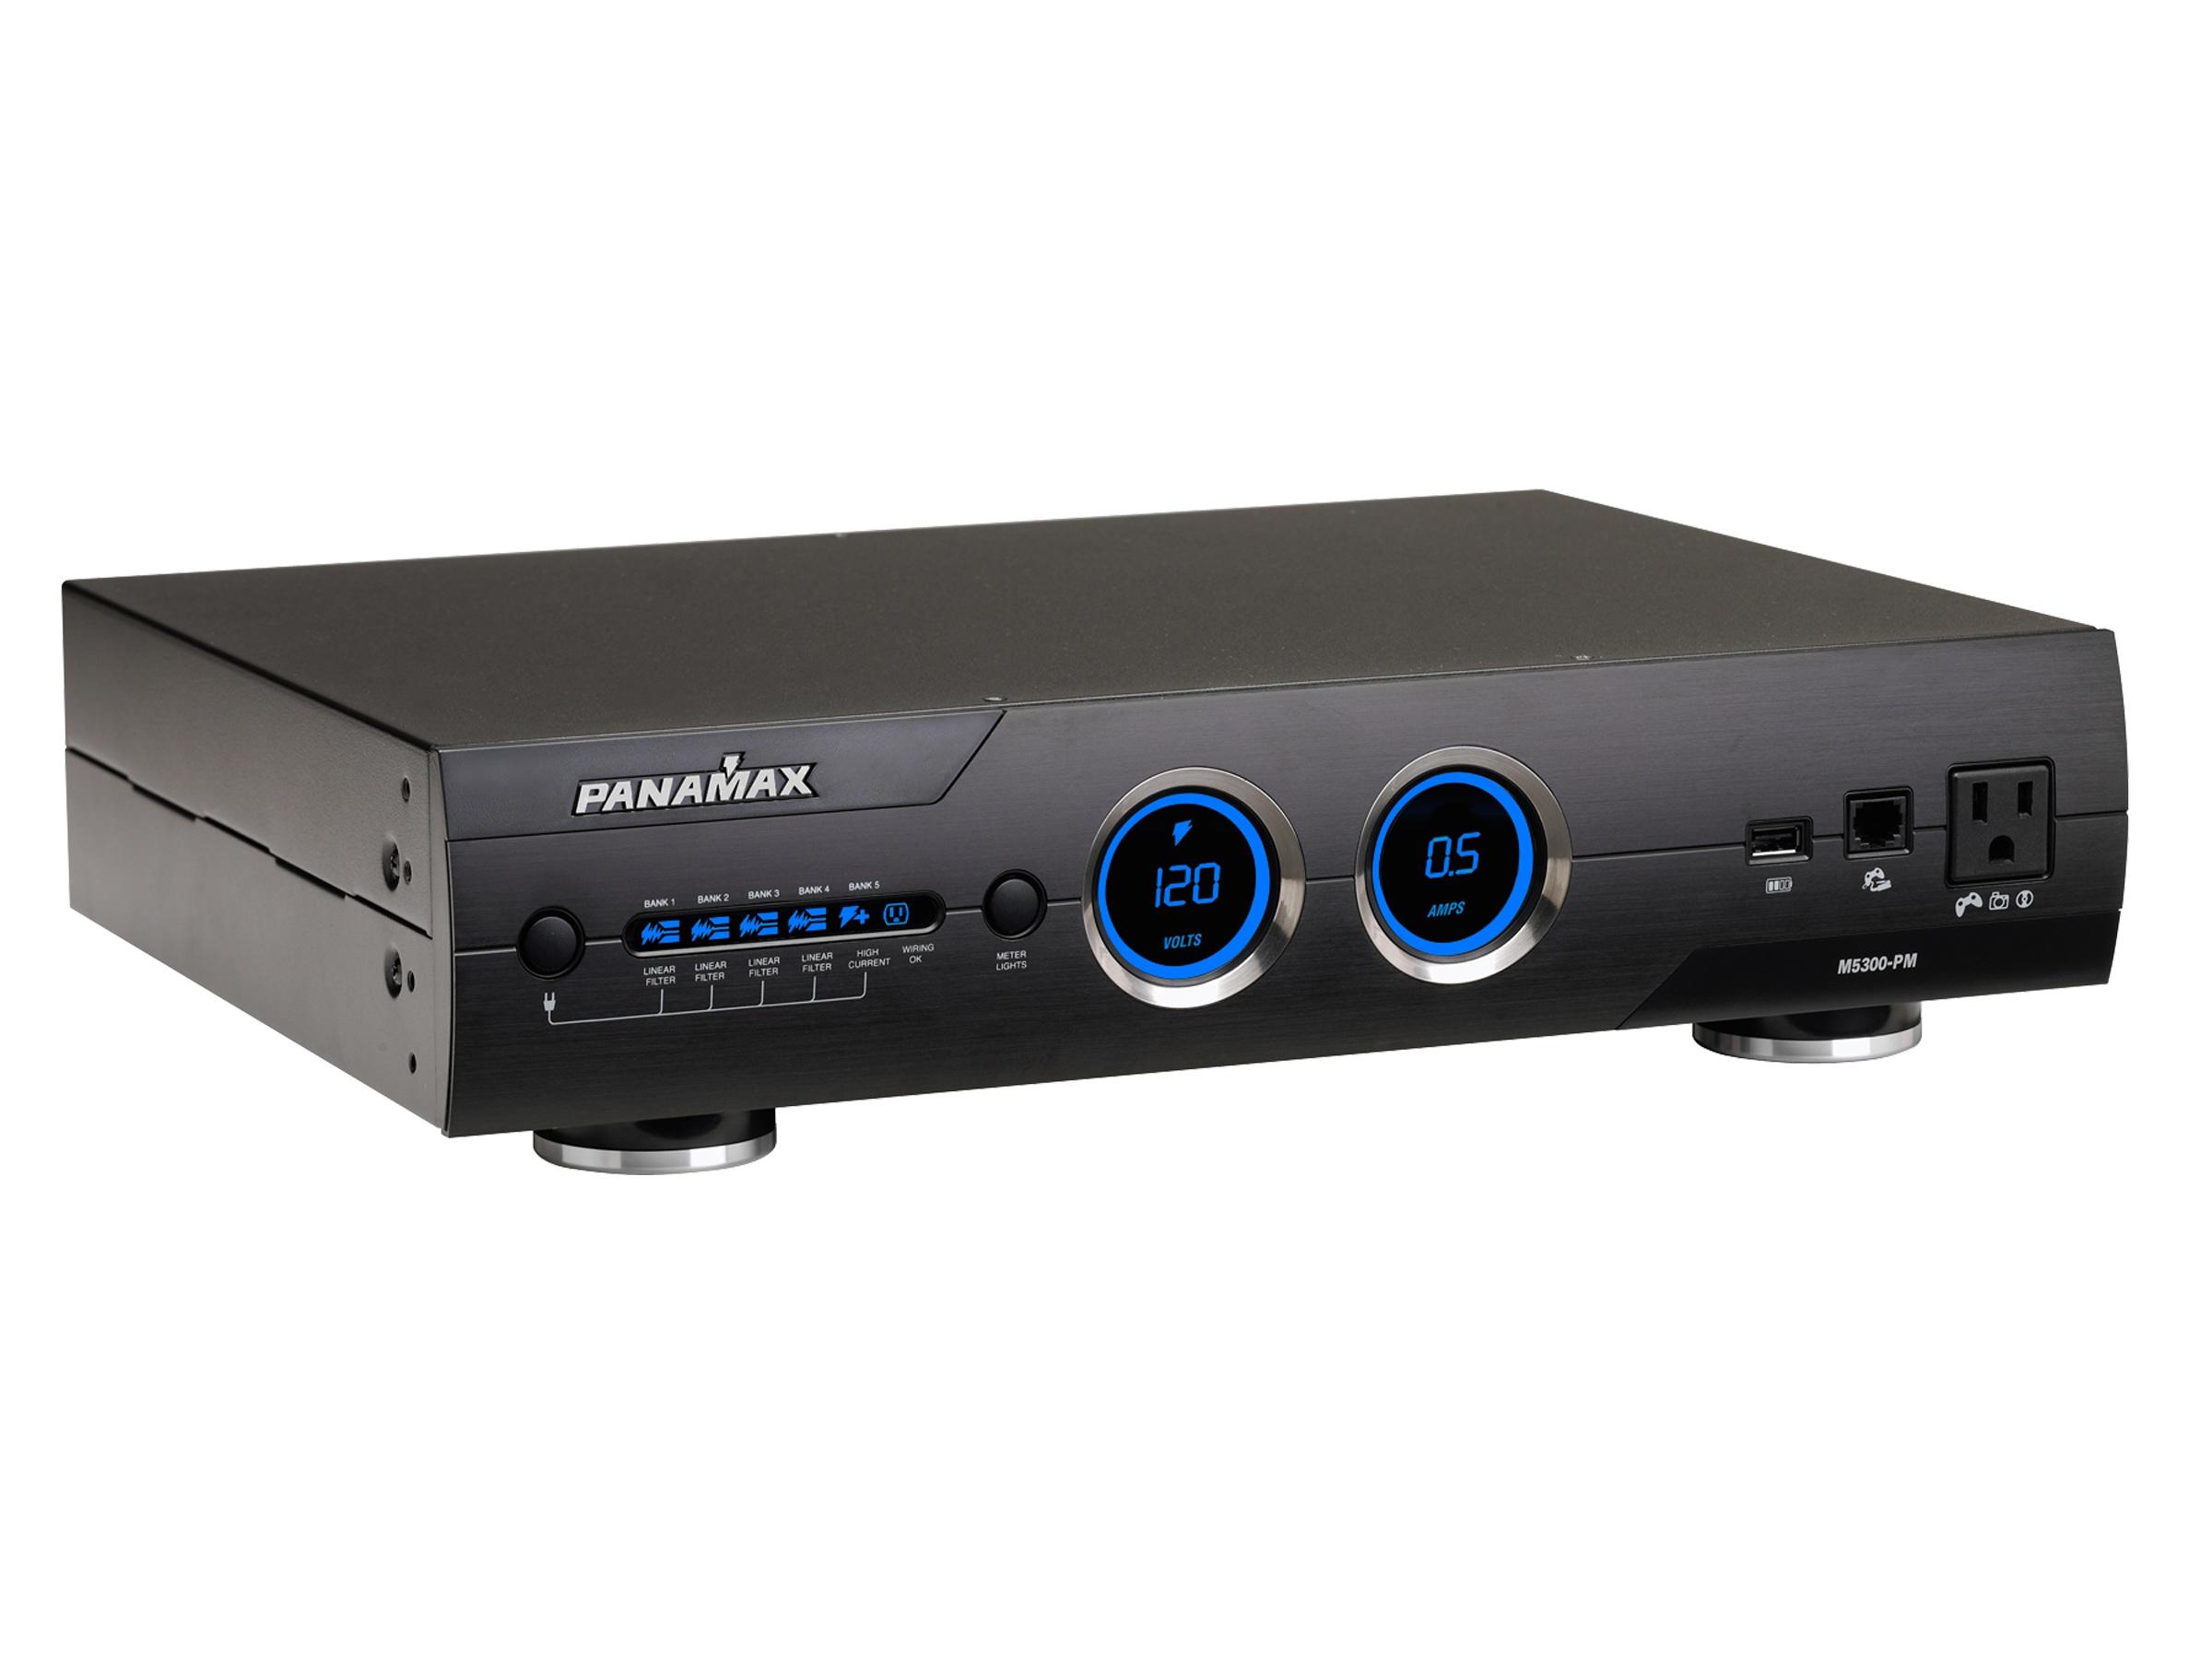 Panamax M5300-PM Max 5300 Power Conditioners/2RU/11 Outlets